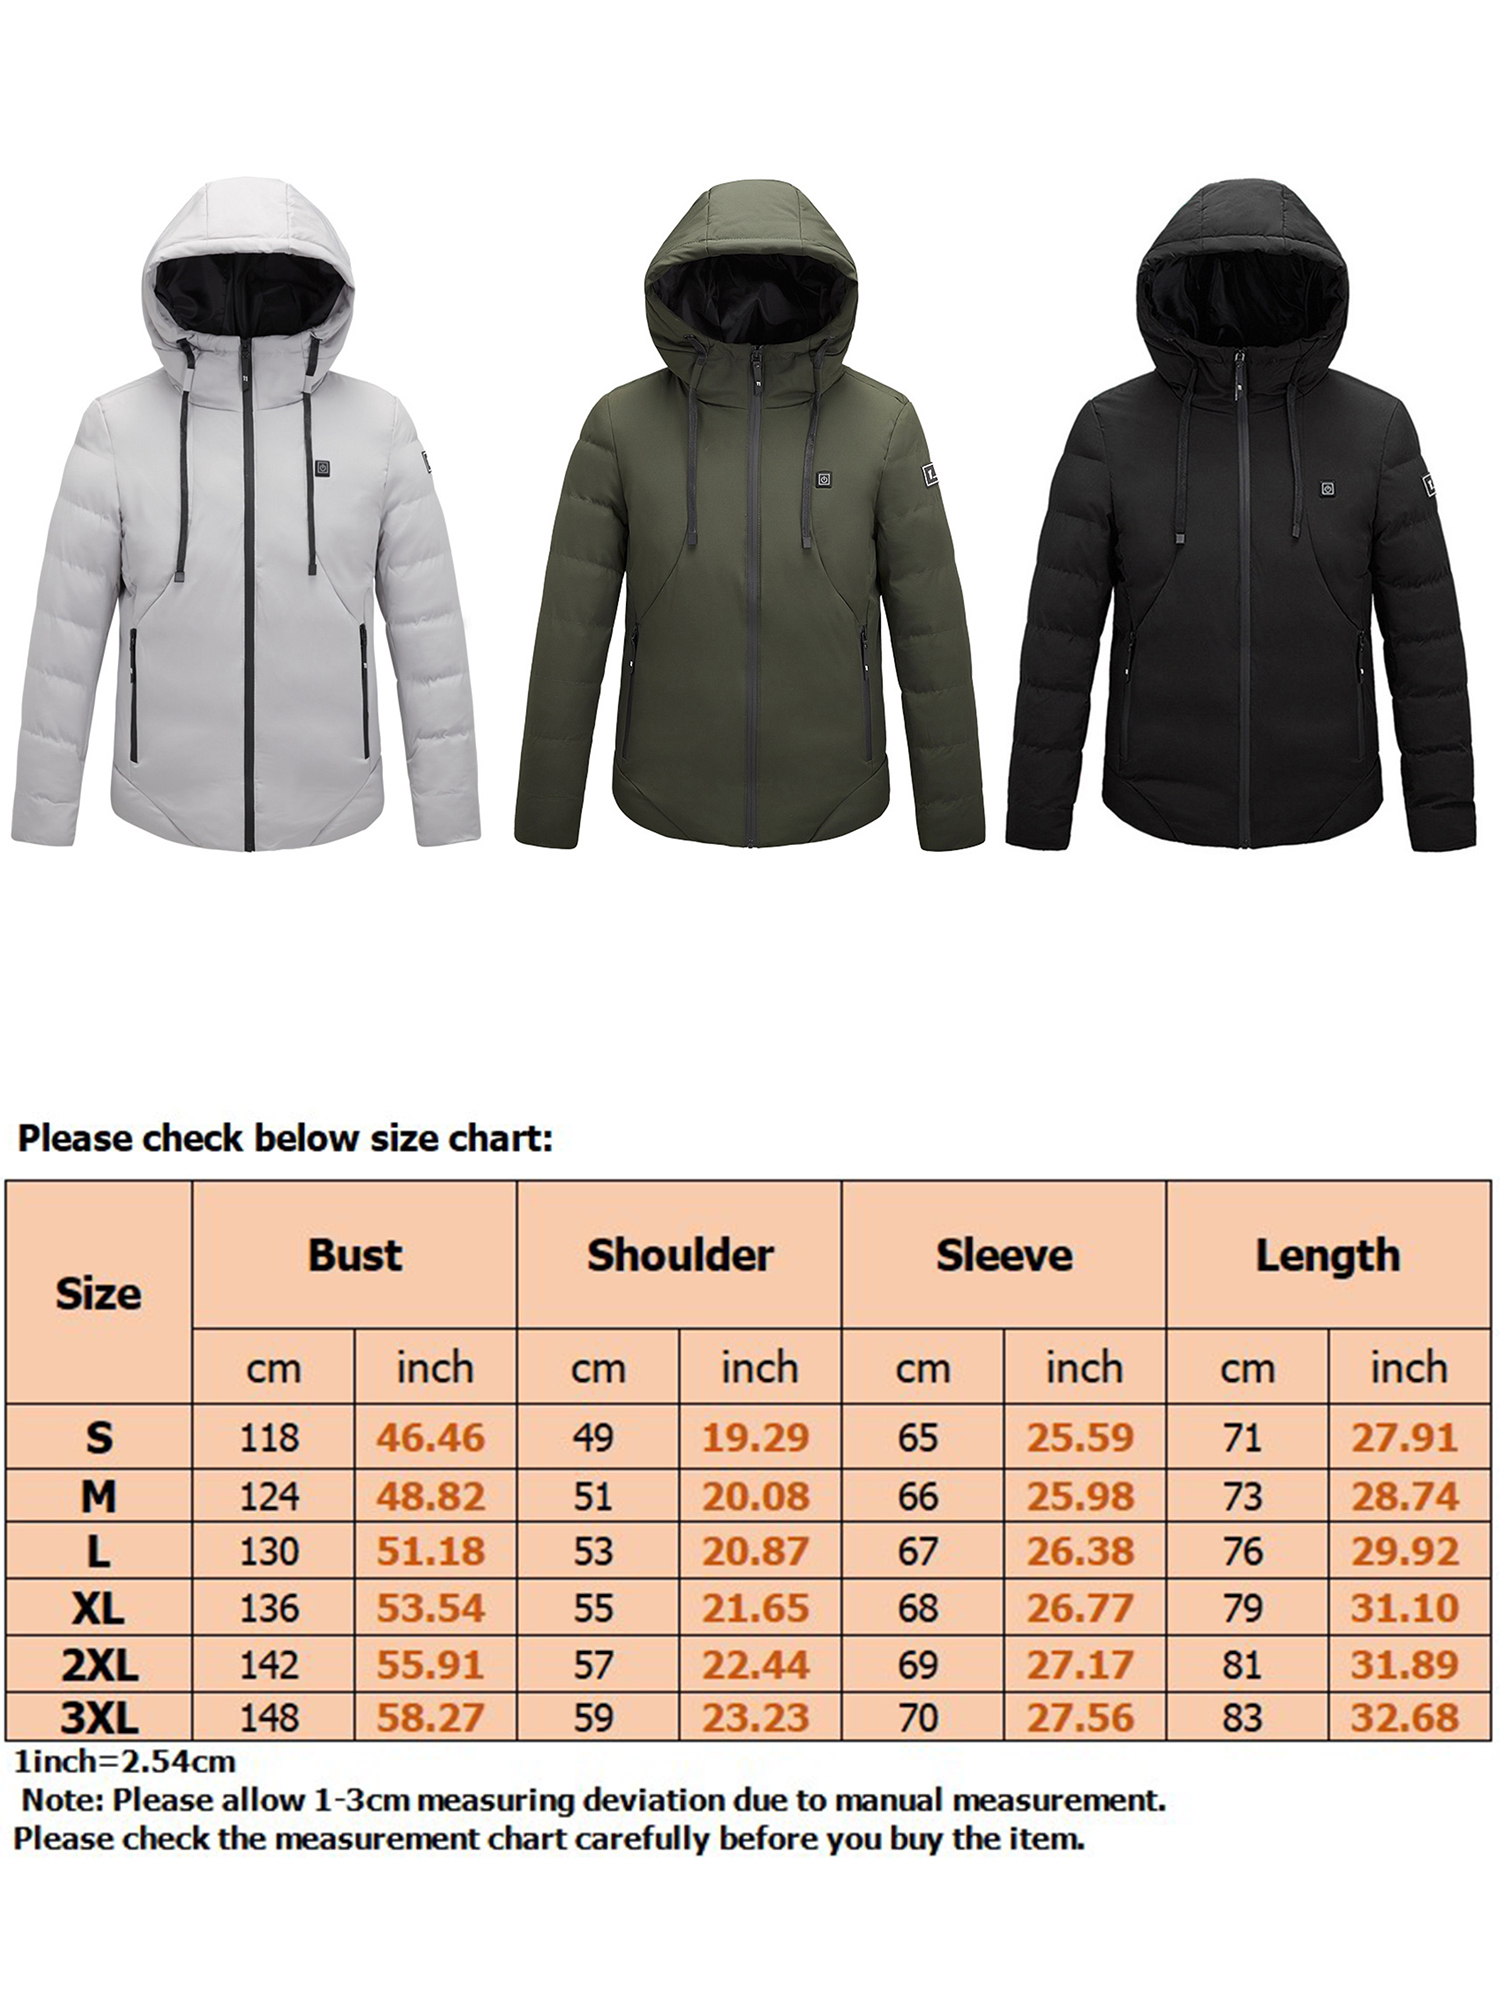 Sexy Dance Heating Jacket for Men Hooded Heated Coat Electric Thermal Outwear Outdoor Down Jackets with 10000mAh Battery Pack - image 2 of 10